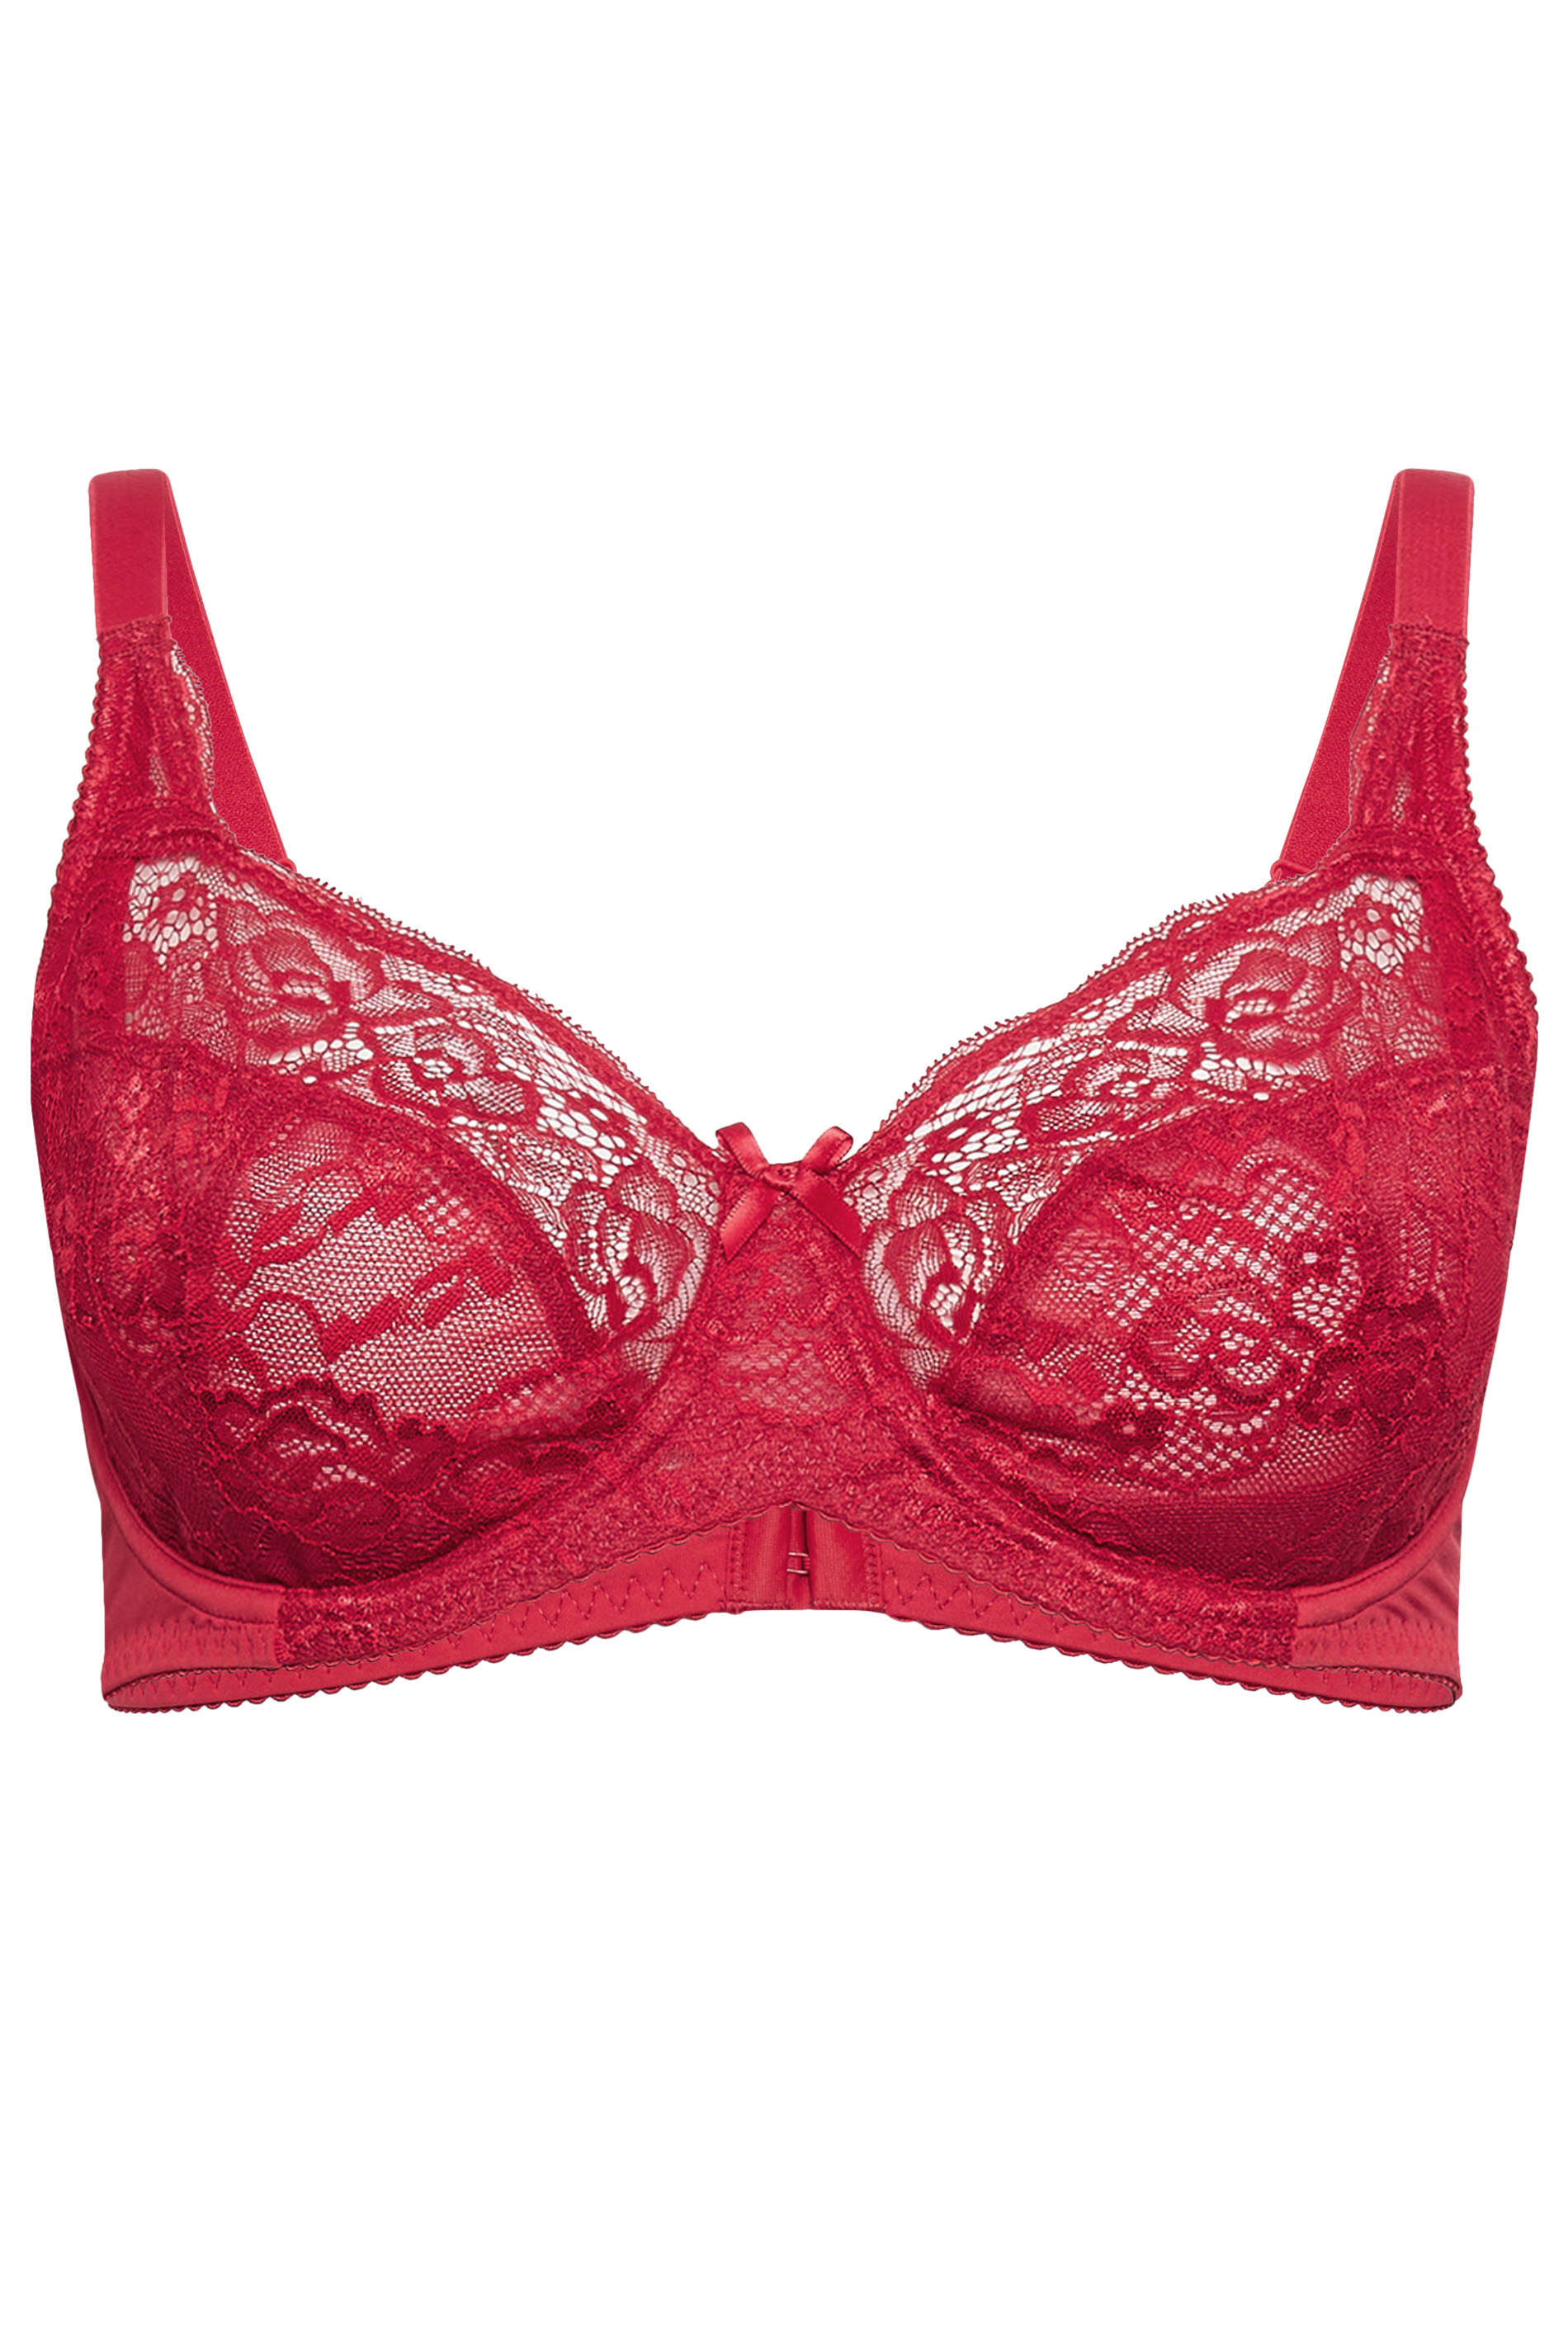 2-pack Non-padded Lace Bras - Red/black - Ladies